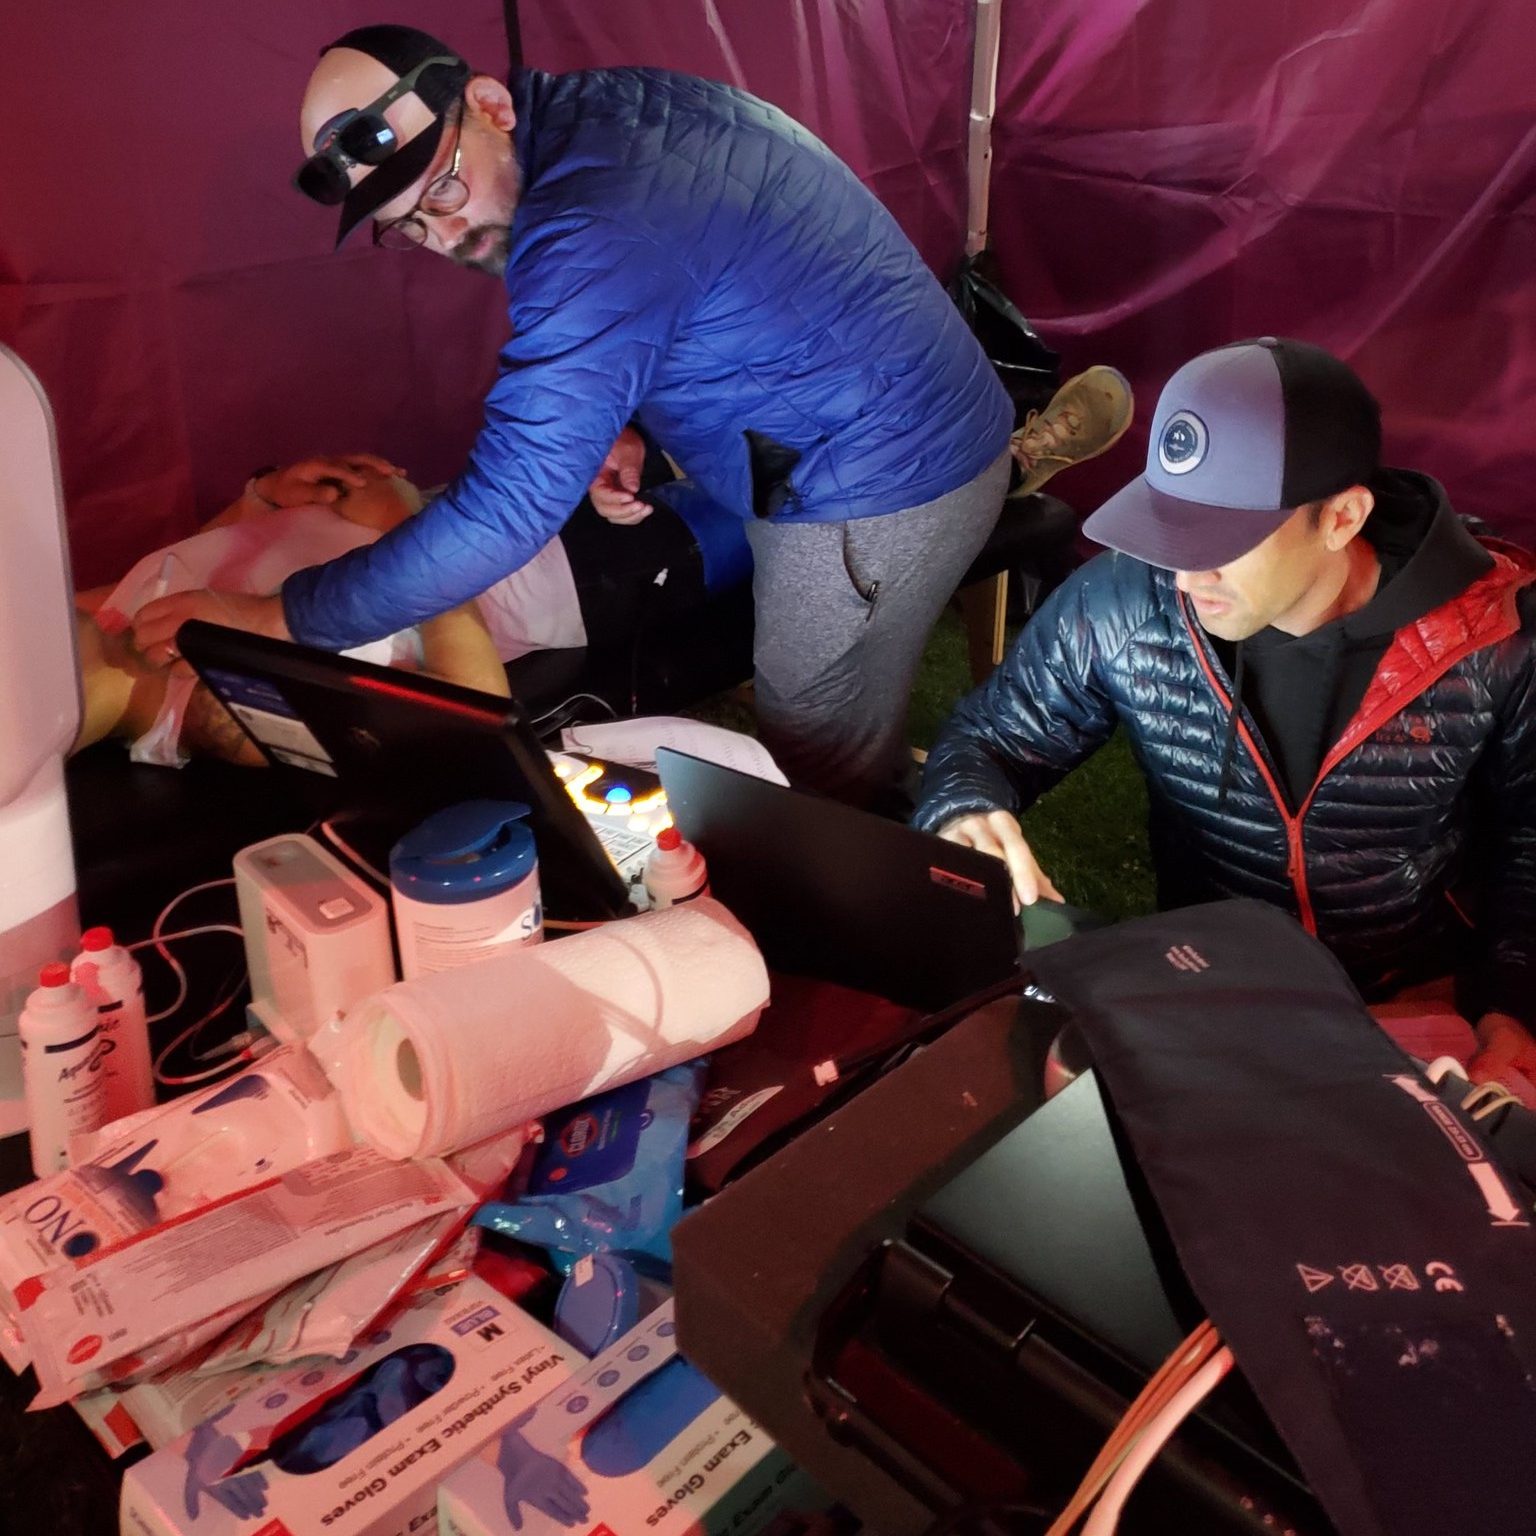 Drs. Grosicki and Babcock (University of Colorado, Anschutz Medical Campus) work through the night to collect cardiovascular measures on race finishers.